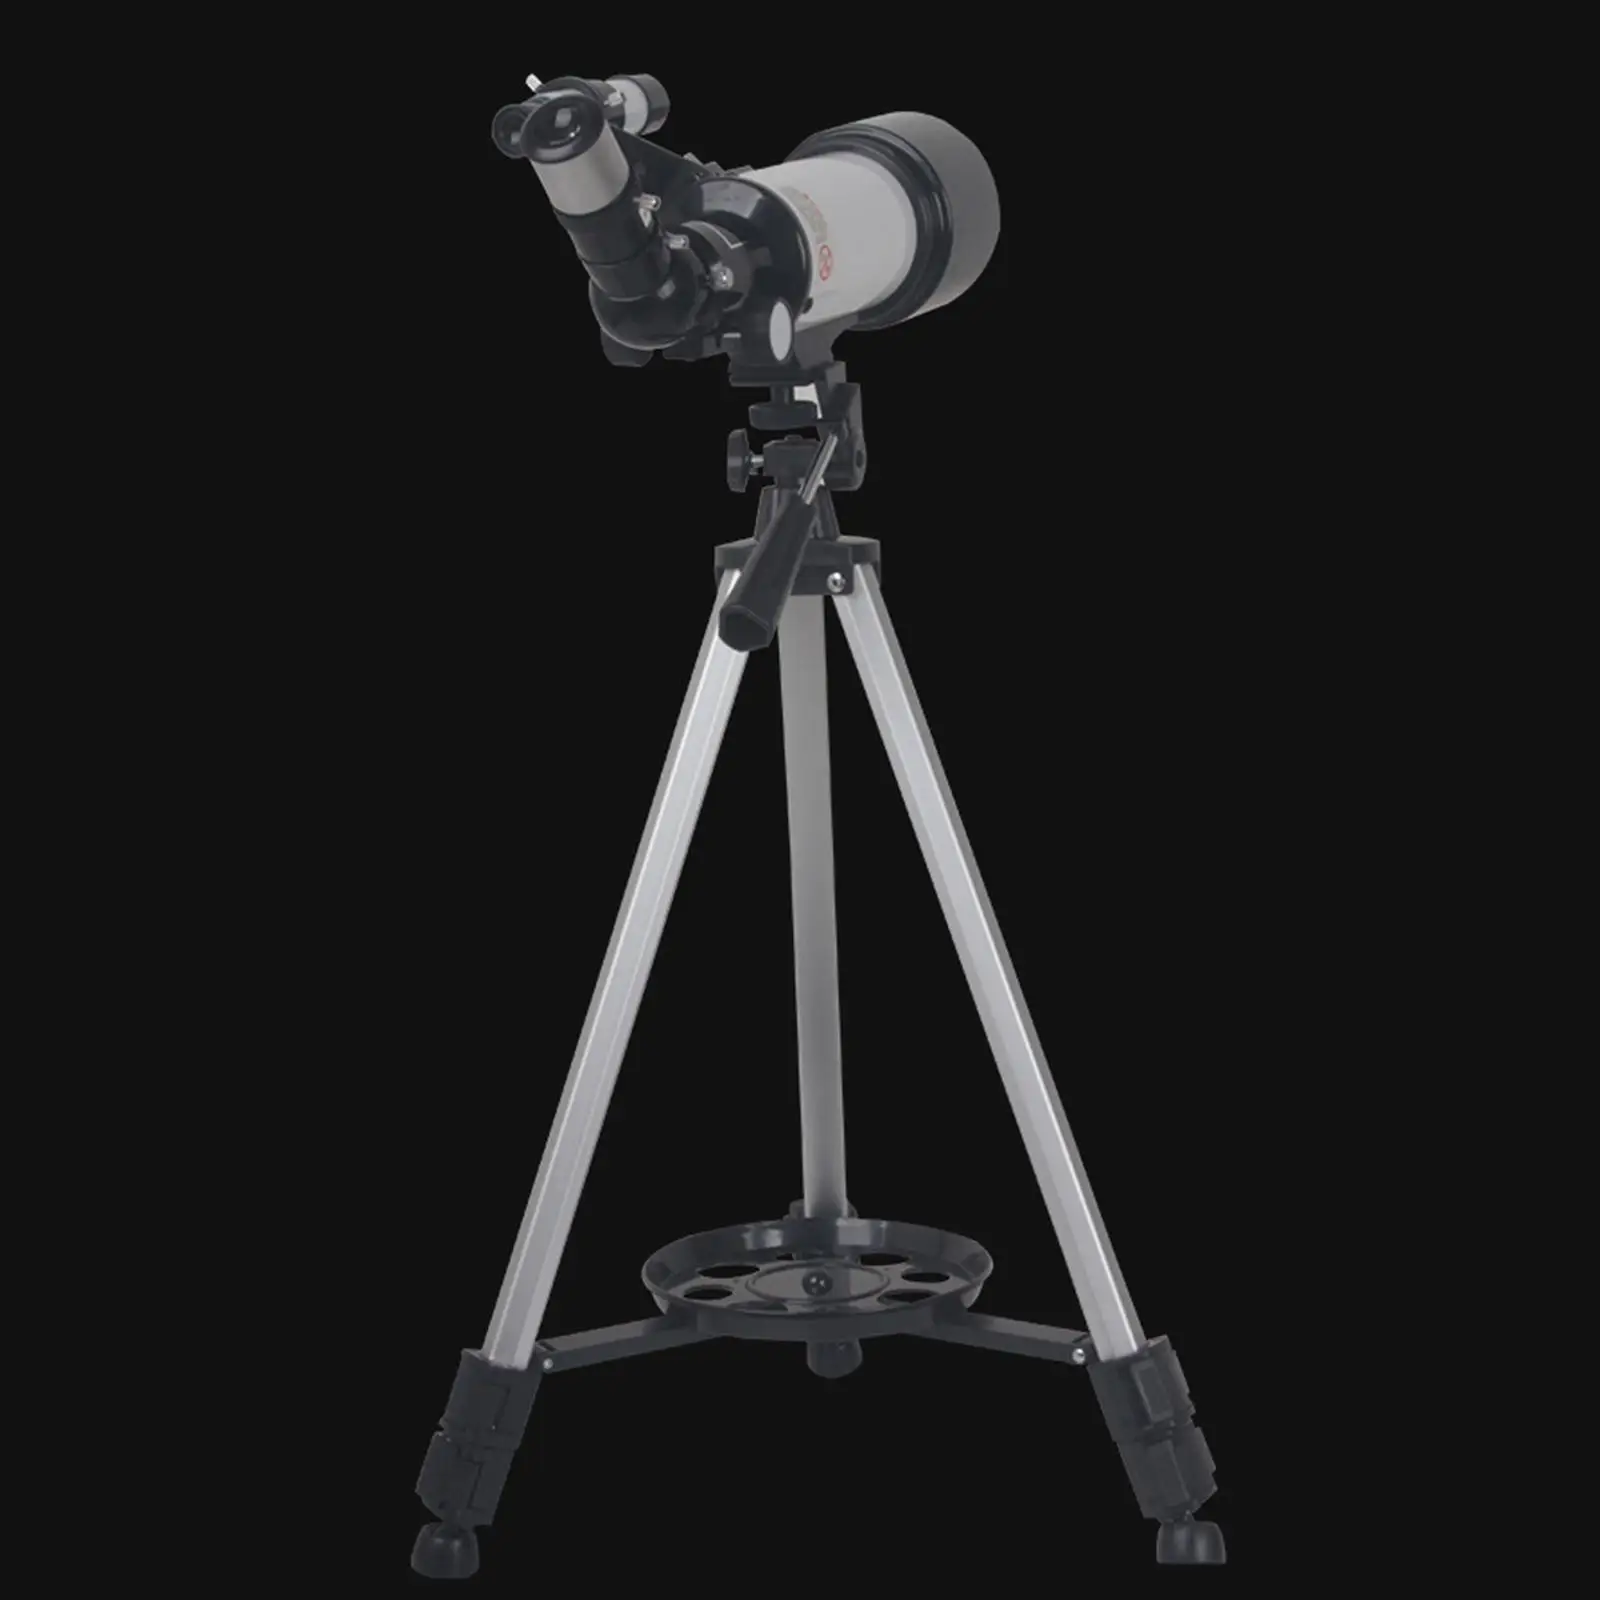 70mm Aperture 400mm Focal Length Telescope with Tripod for Beginners with 10mm, 25mm Eyepieces Durable Accessories Professional